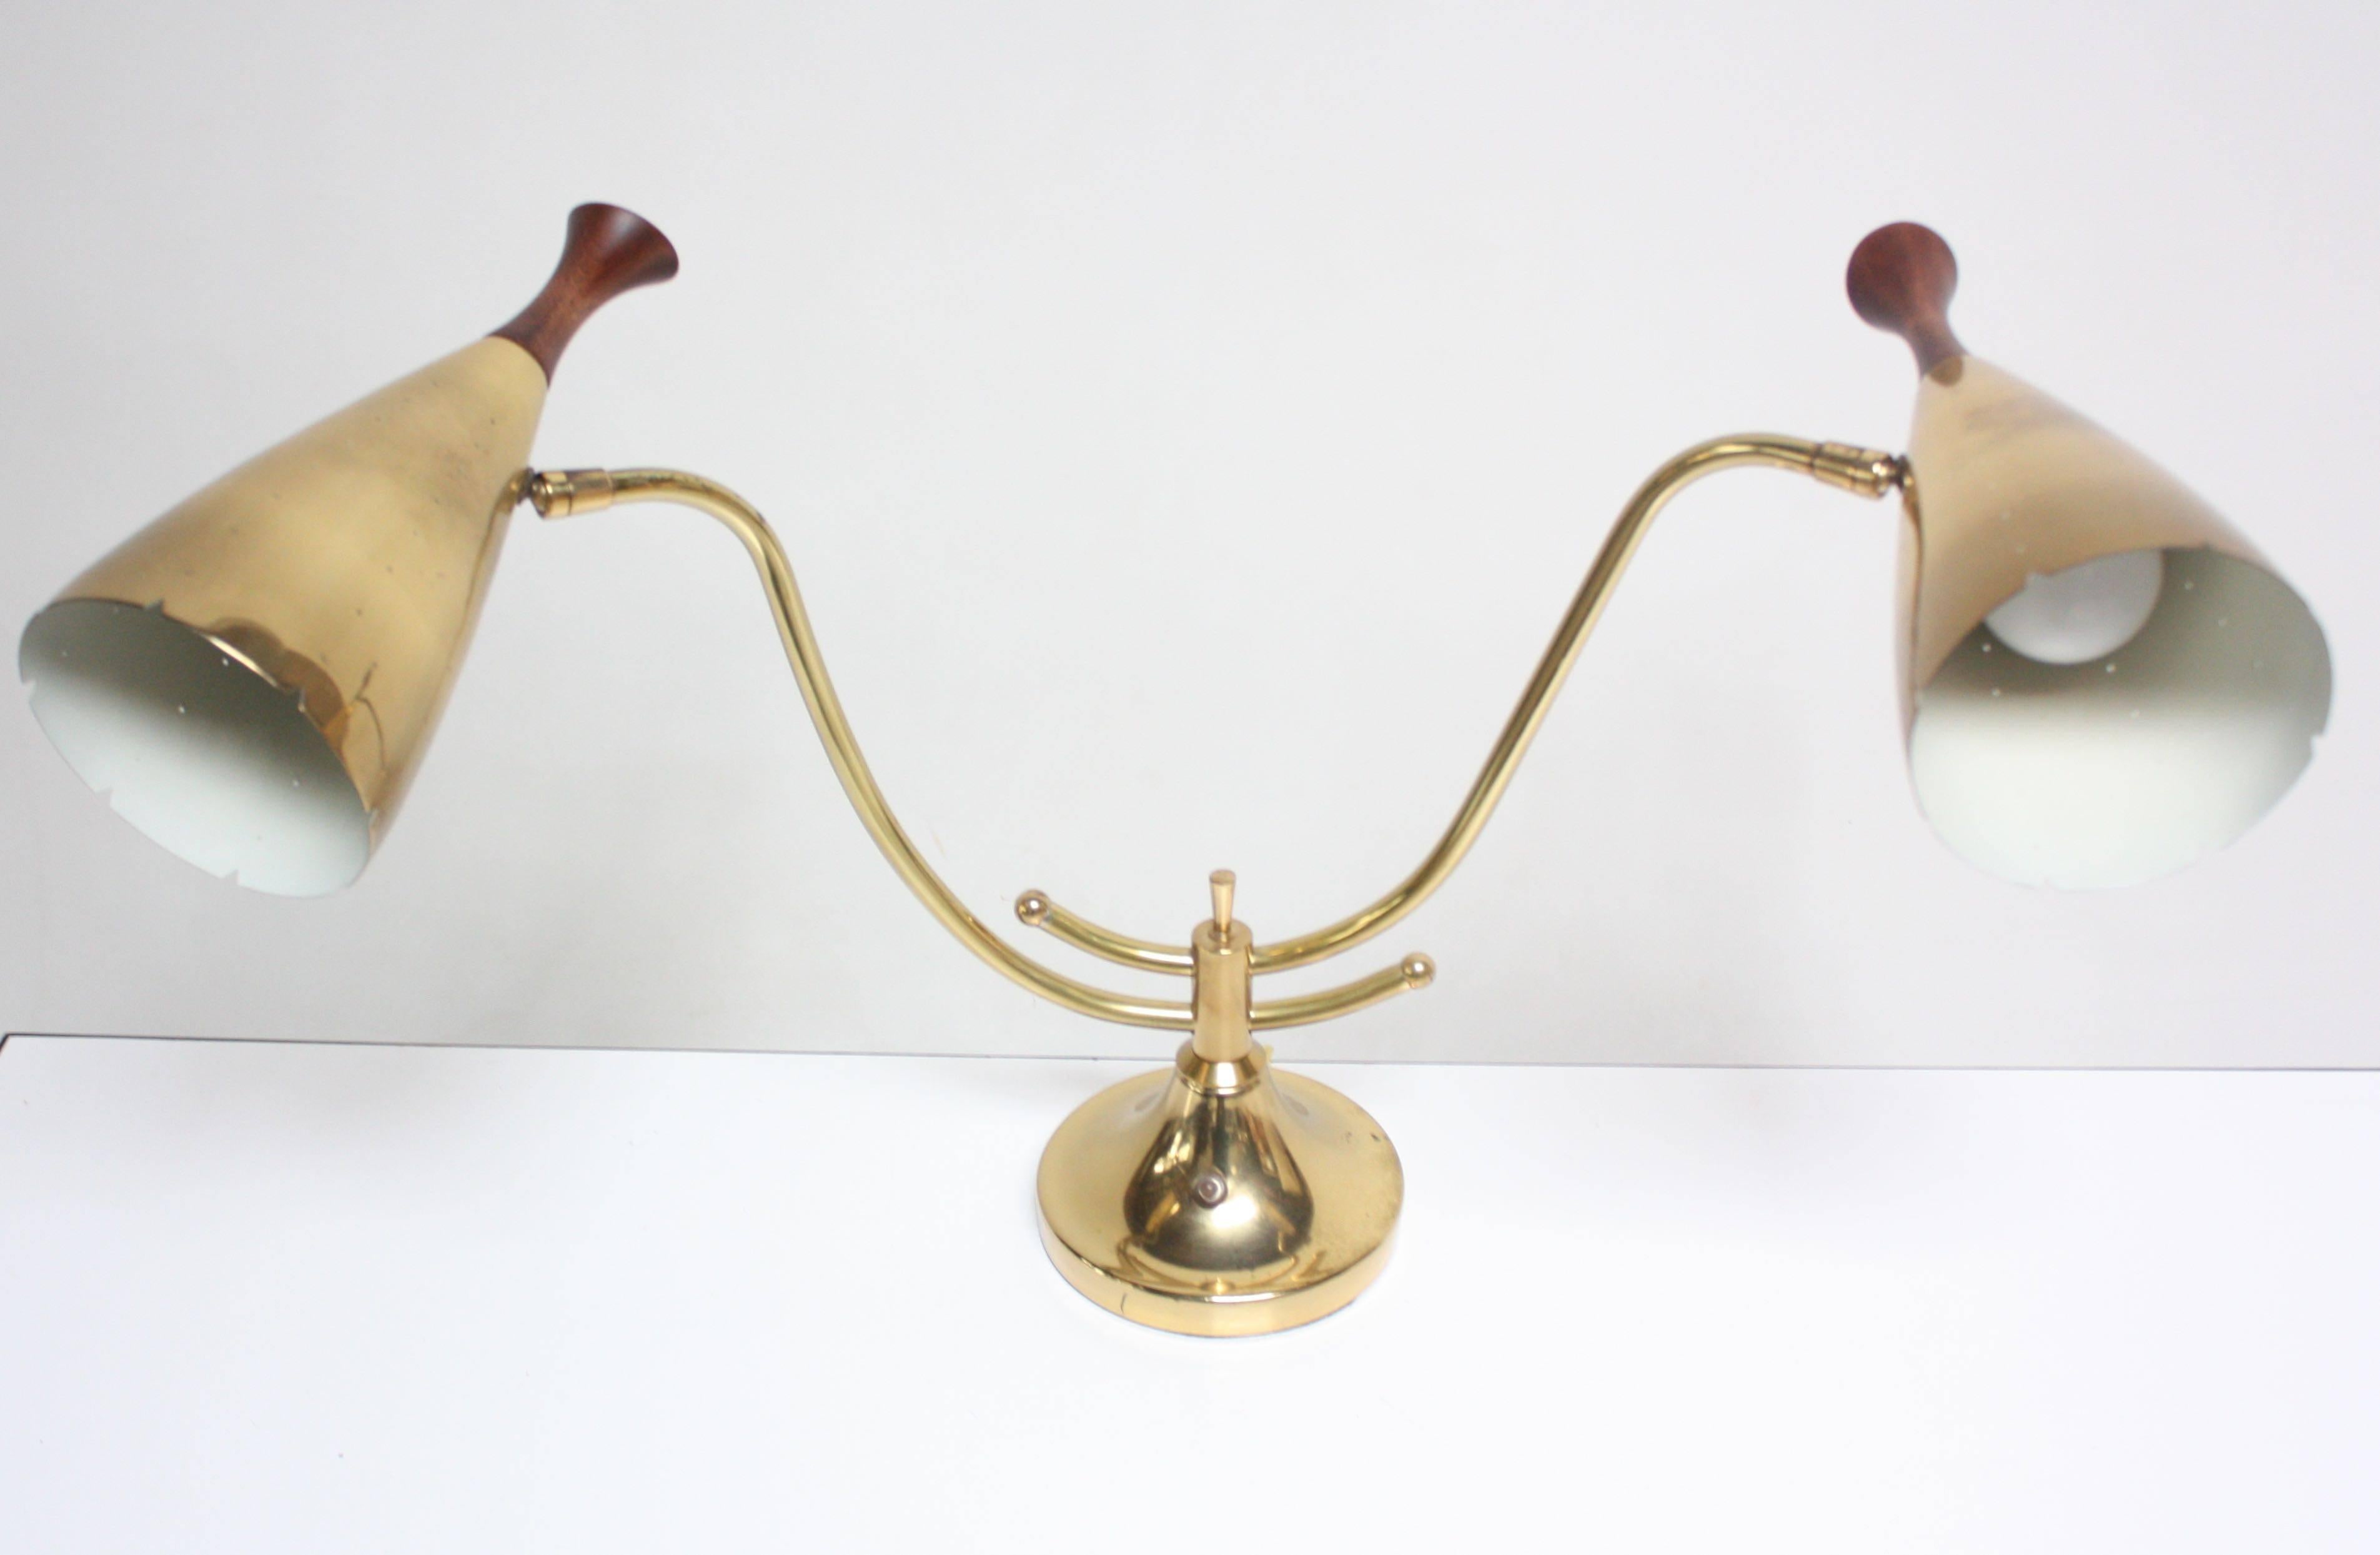 This American modern brass table lamp features two adjustable brass fixtures with sculpted walnut finials (only the fixtures themselves, not the arms, adjust). The perforated brass shade design is reminiscent of Paavo Tynell's designs for Taito Oy.